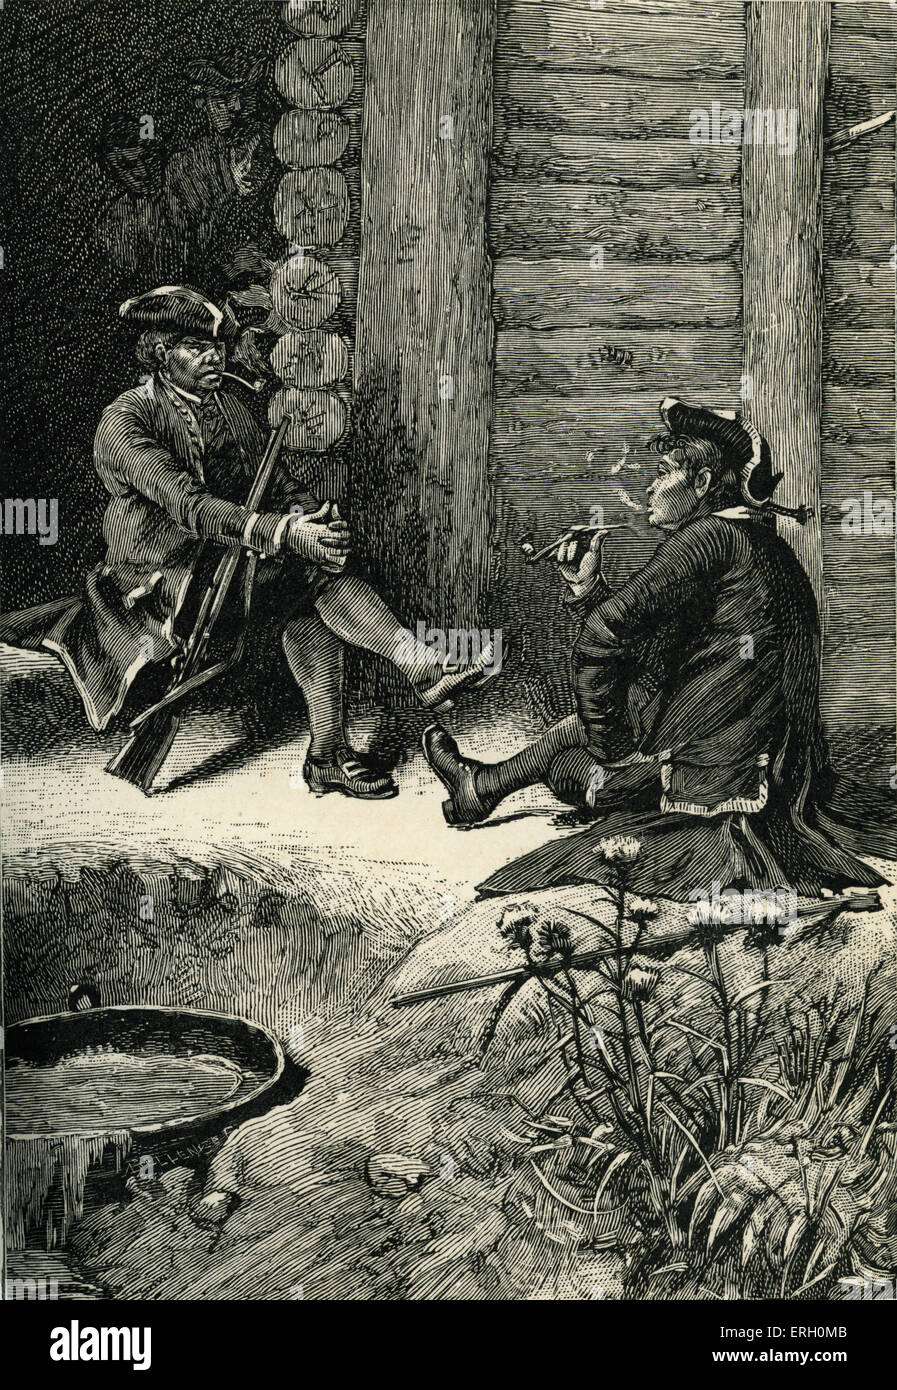 Treasure Island by Robert Louis Stevenson. Caption reads: 'The two men sat silently smoking for quite a while.' (John Silver and Captain Smollet, negotiating terms.) Chapter XX Silver's Embassy. First Published in 1881-82. RLS: Scottish novelist, poet, and travel writer, 13 November 1850 – 3 December 1894. Stock Photo